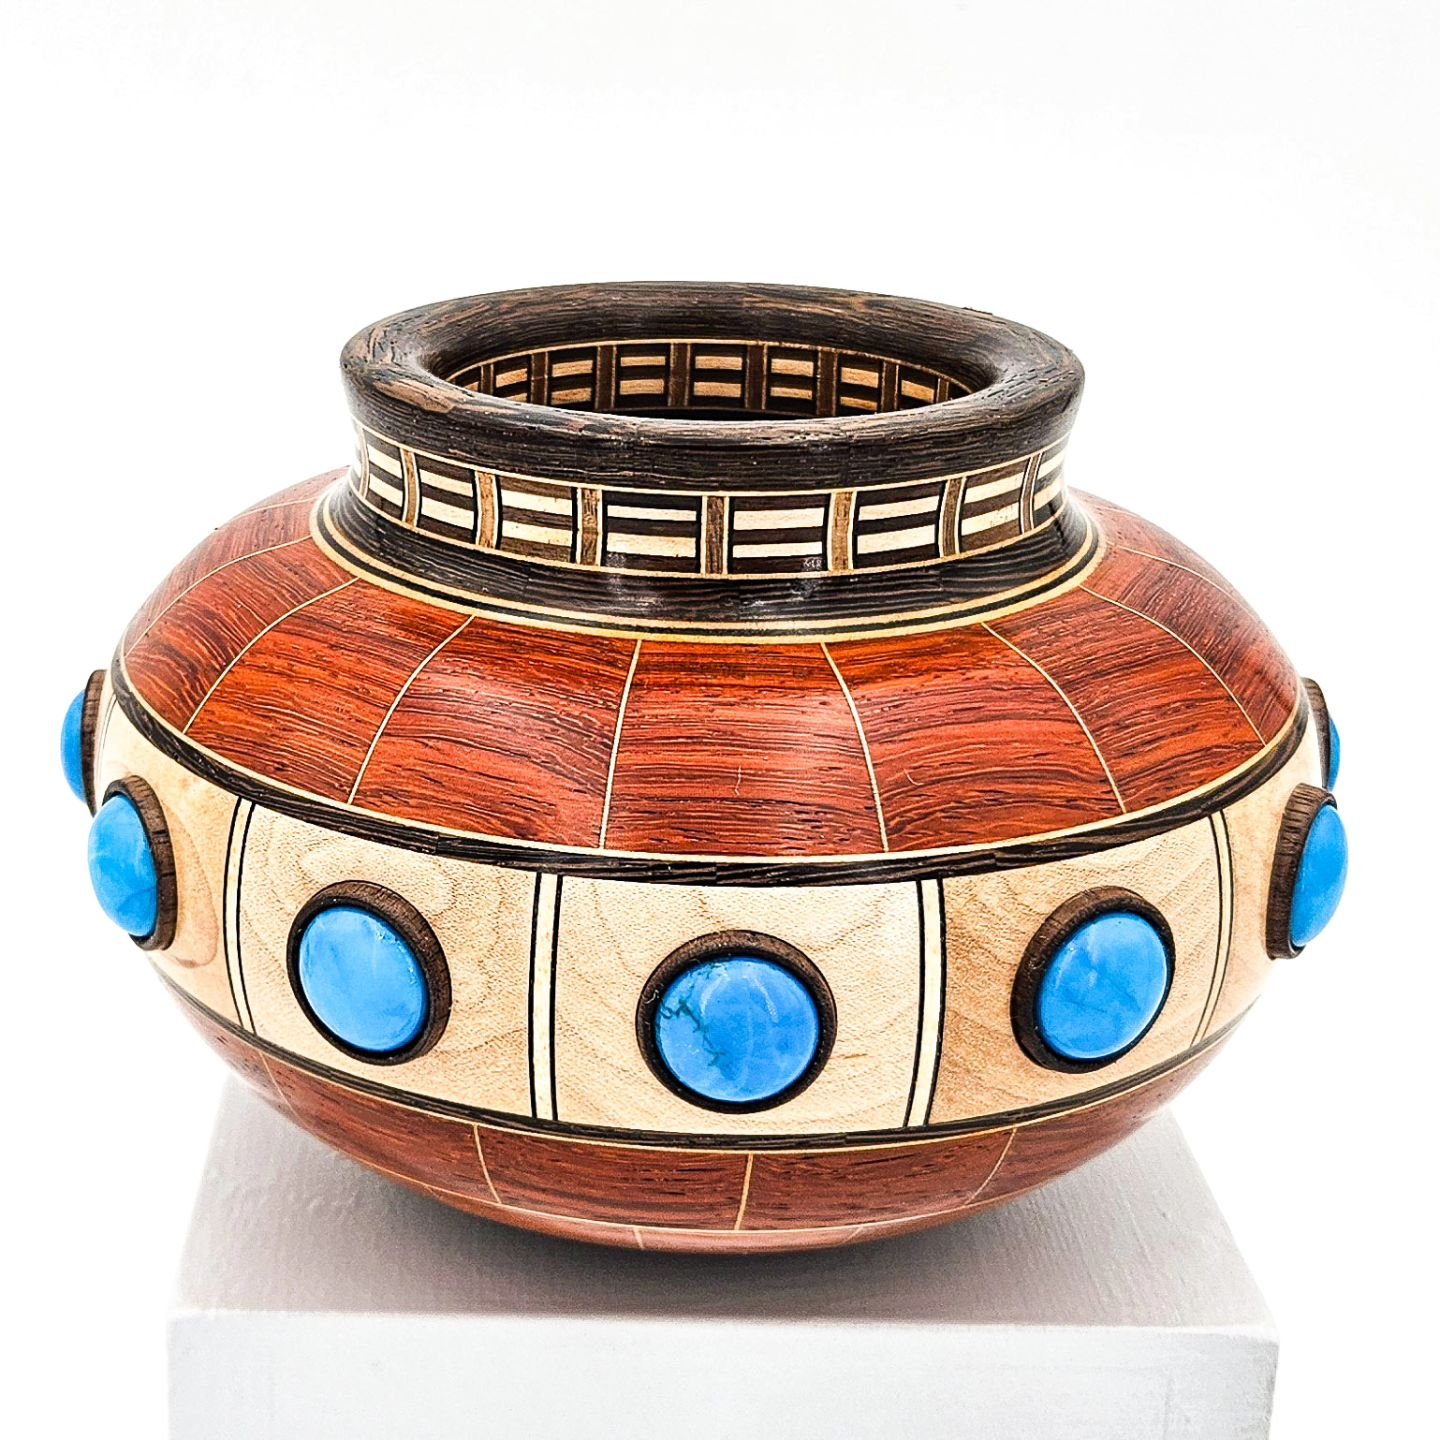 The Lil Vessel Series, cont. A small vessel, made from Bloodwood, Ash, Wenge, Black Walnut &amp; Turquoise. Approximately 5.75&quot; x 4.25&quot;. More: See links in bio.
:
:
:
#woodart, #finewoodart, #sculpture, #woodsculpture, #woodturning, #woodtu